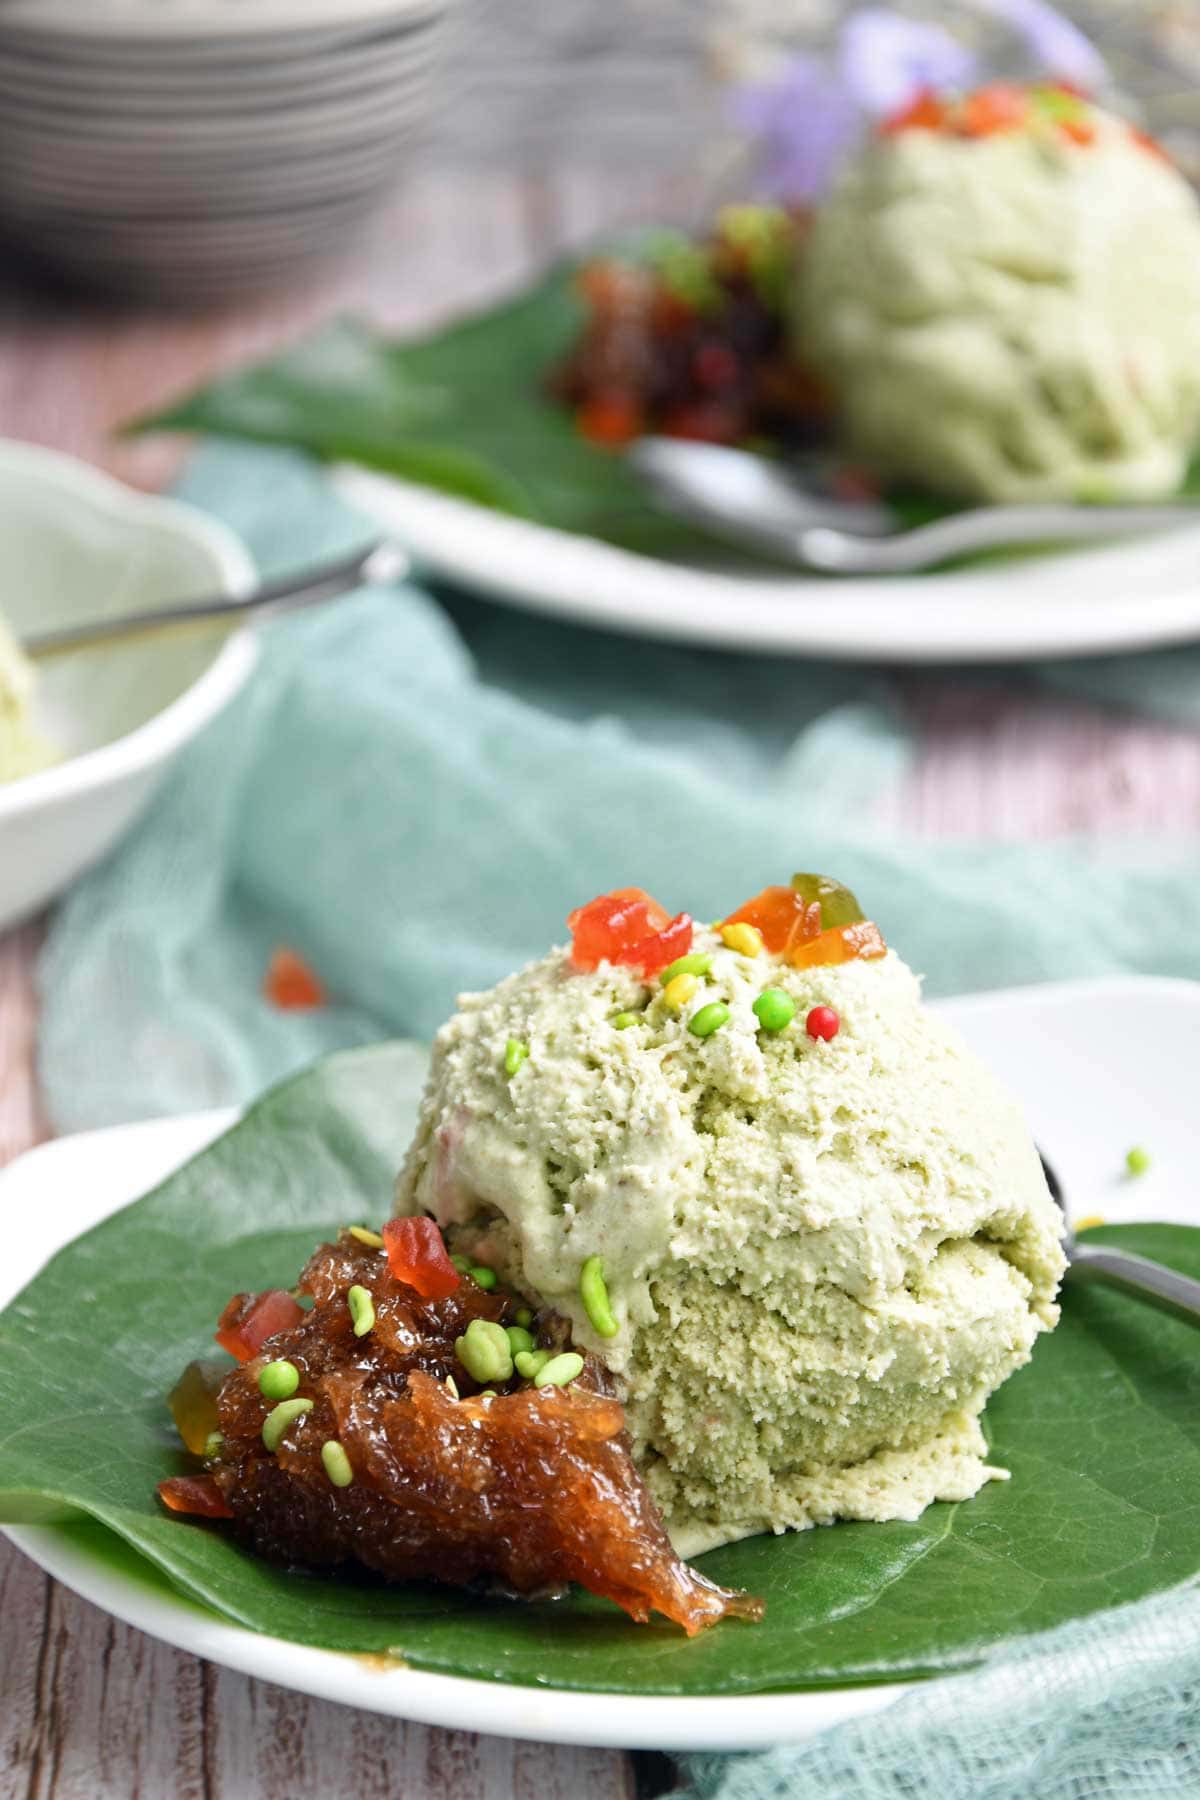 Betel leaves Ice cream scoop served on a plate.